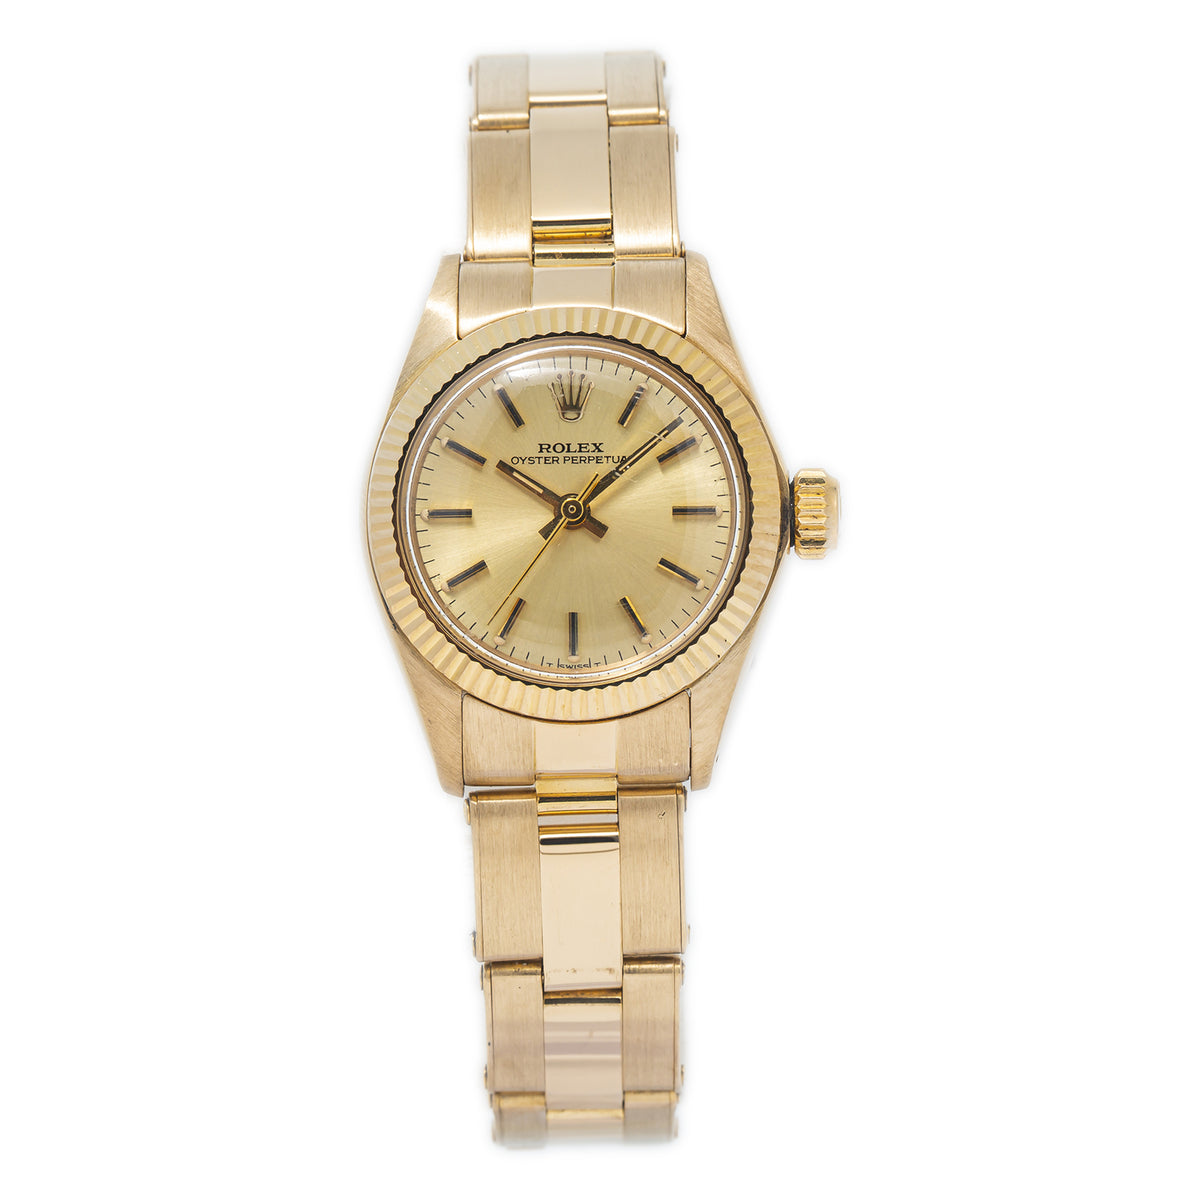 Rolex Oyster Perpetual 6719 18k Yellow Gold Oyster Champagne Dial Watch 26mm